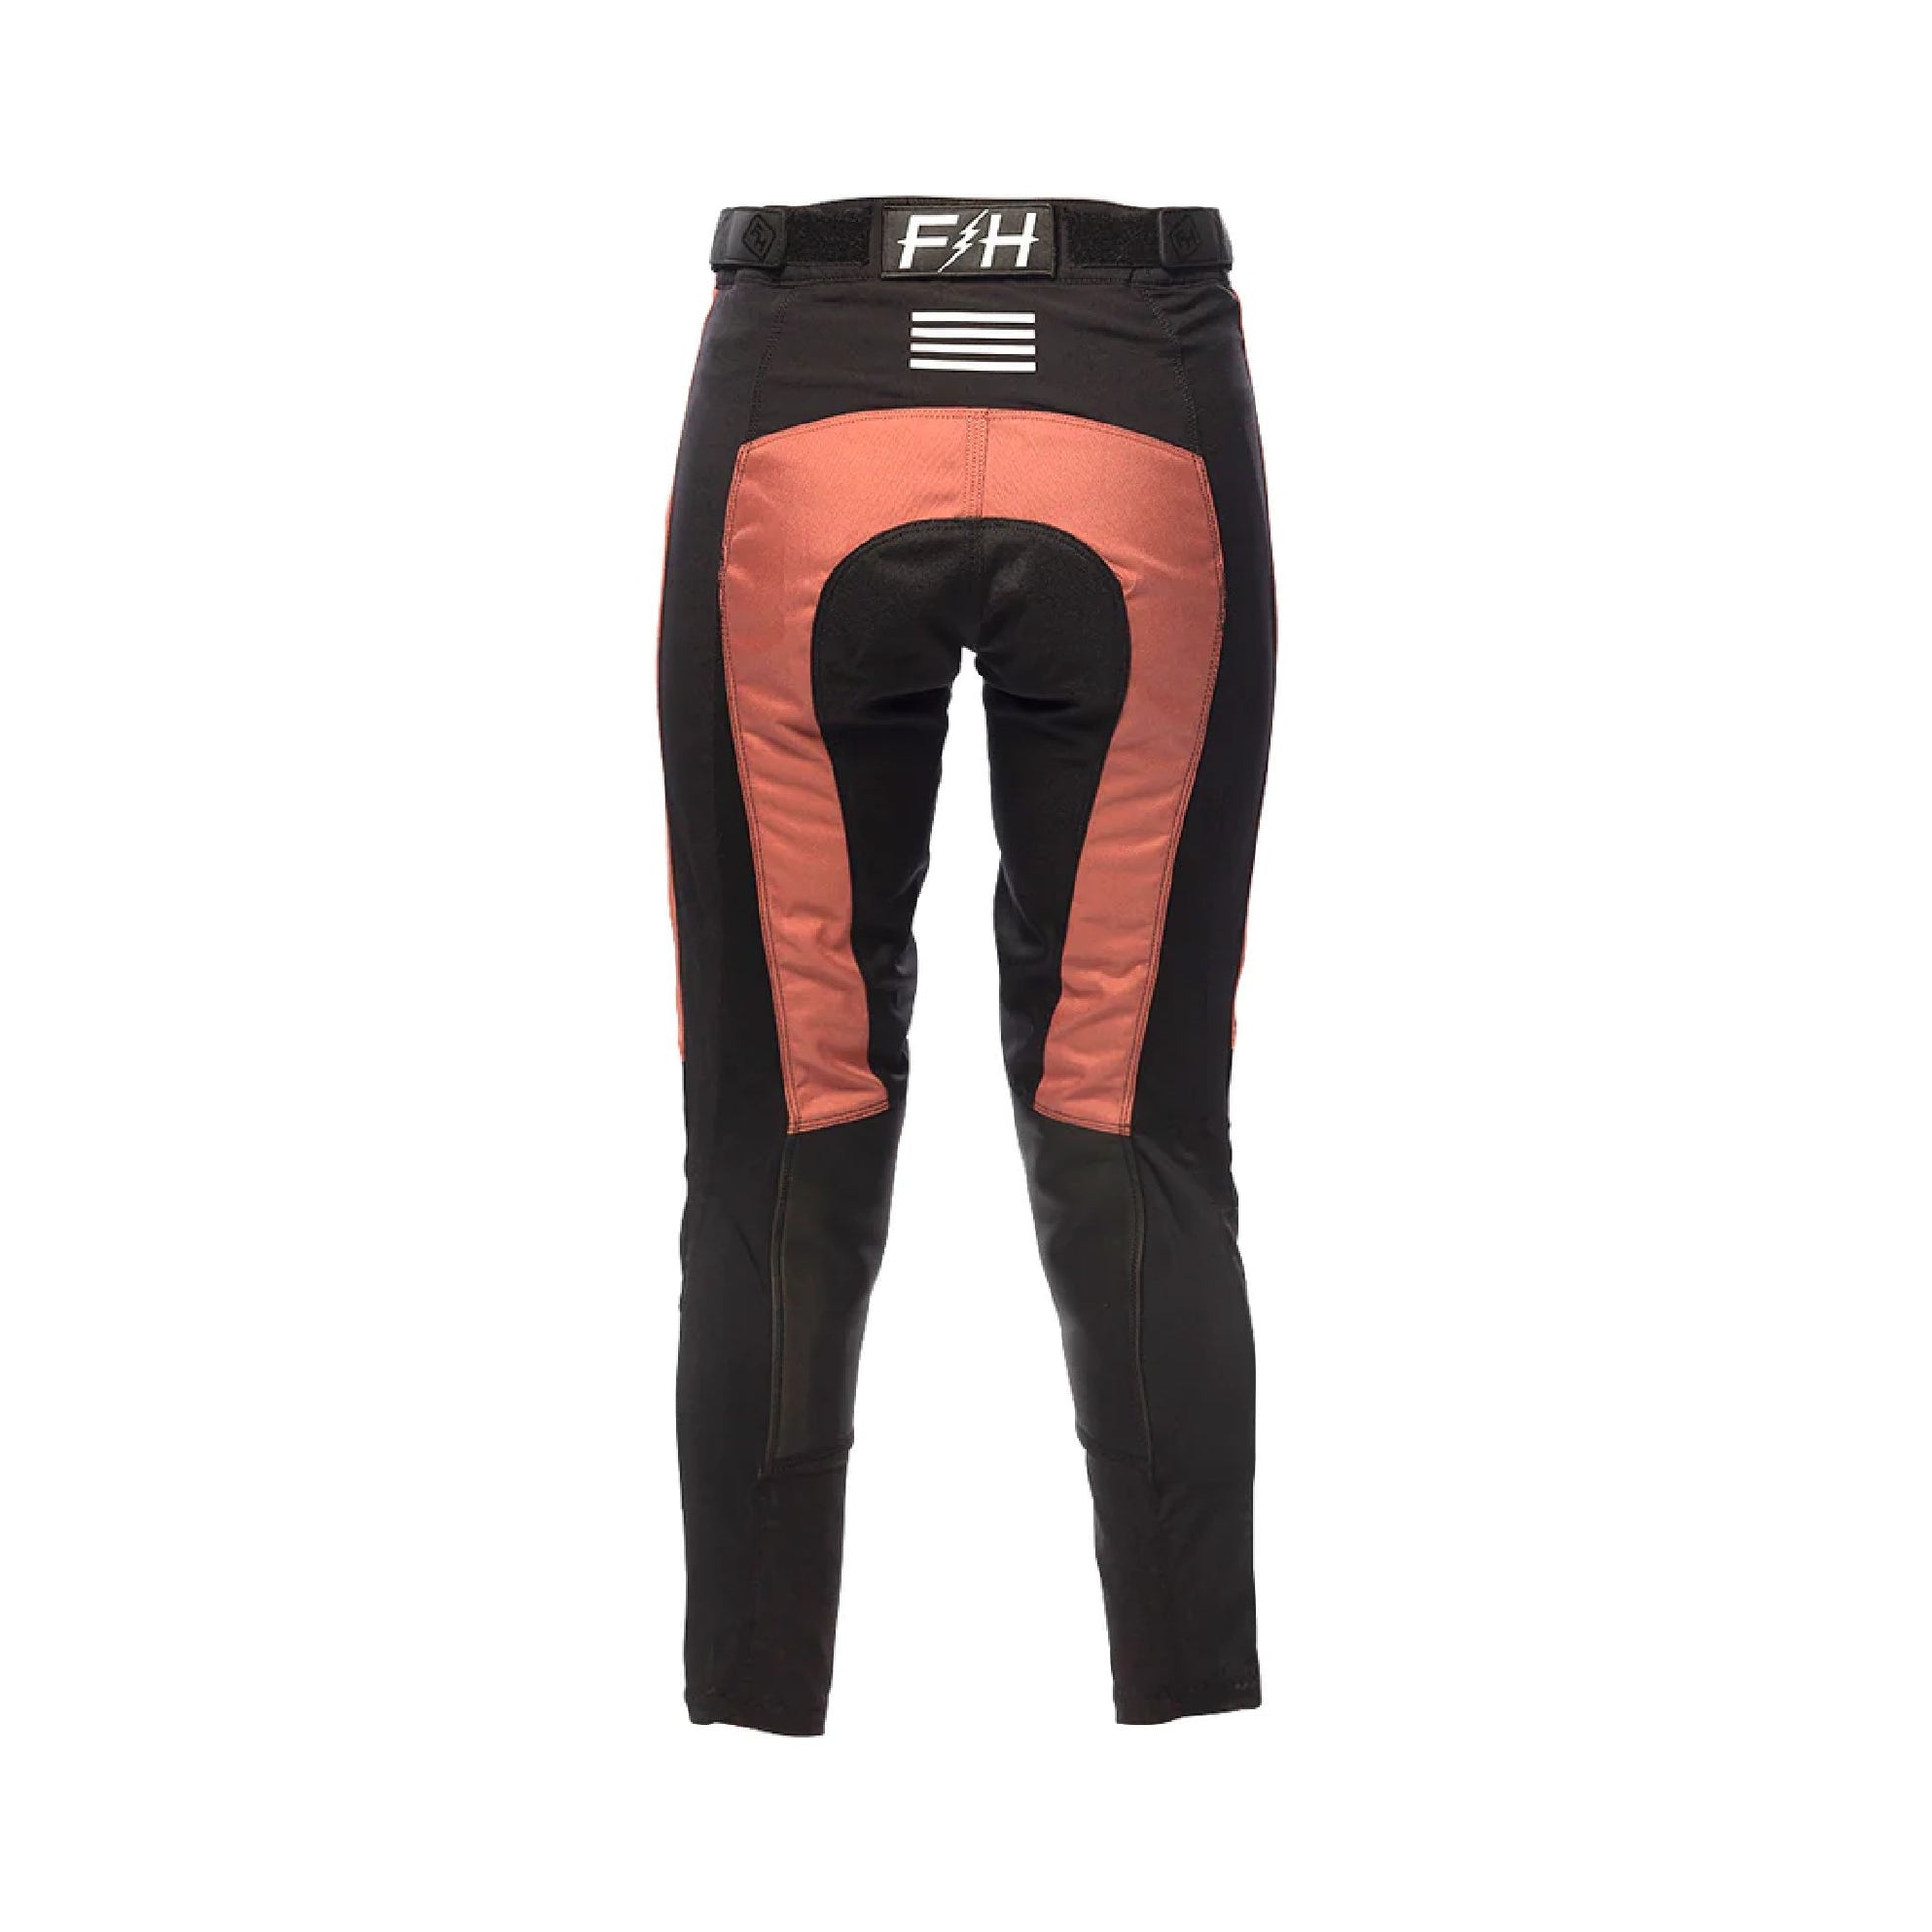 Fasthouse Youth Girls' Speed Style Pant Mauve Bike Pants